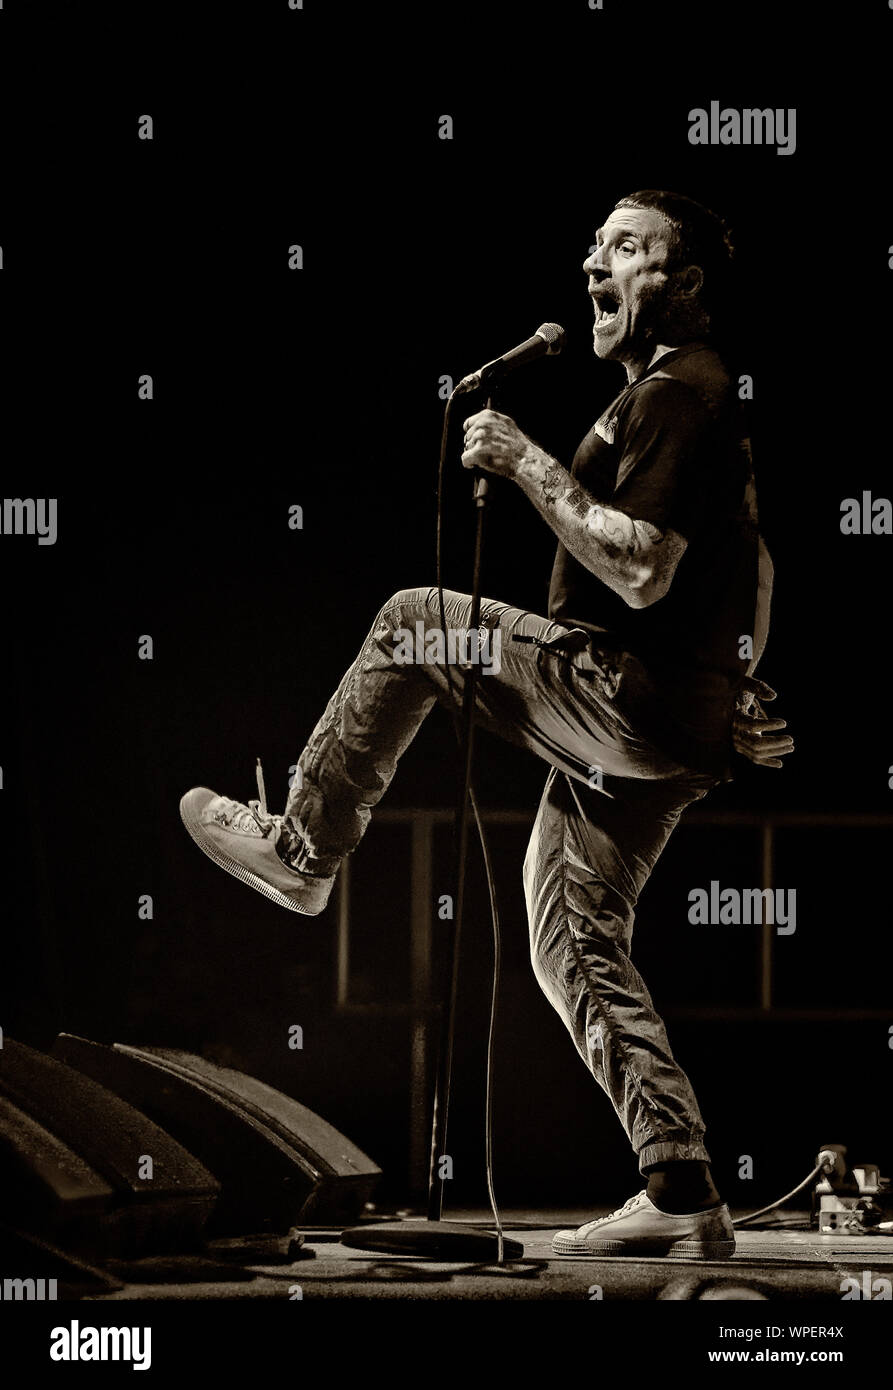 James Williamson of Sleaford Mods live on stage. Stock Photo